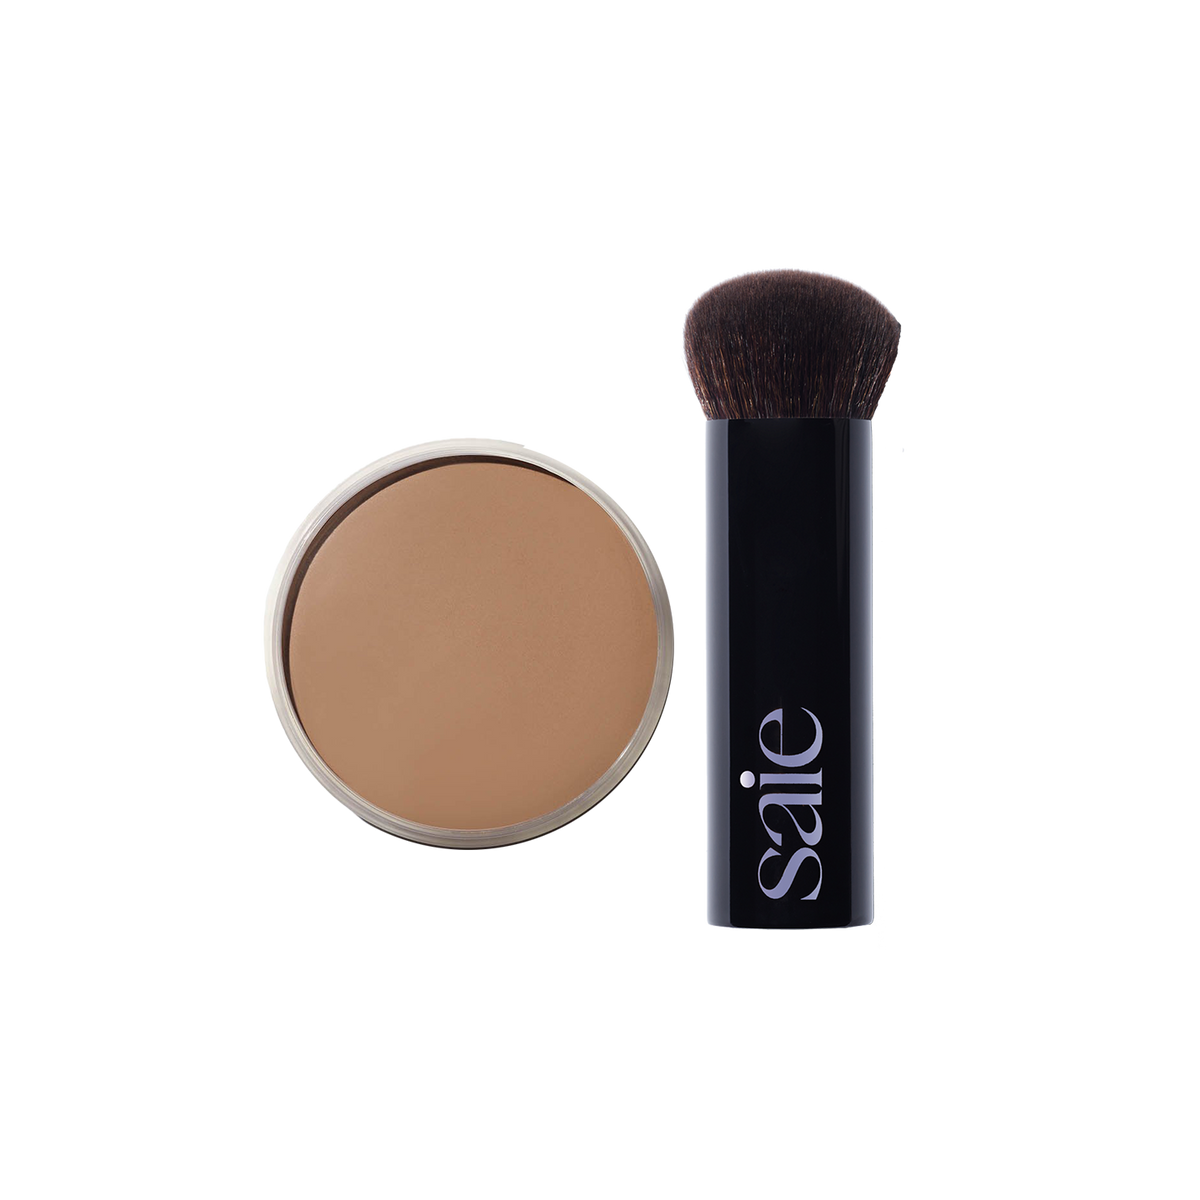 The Sun Melt Duo | The perfect brush for perfect bronze – Saie